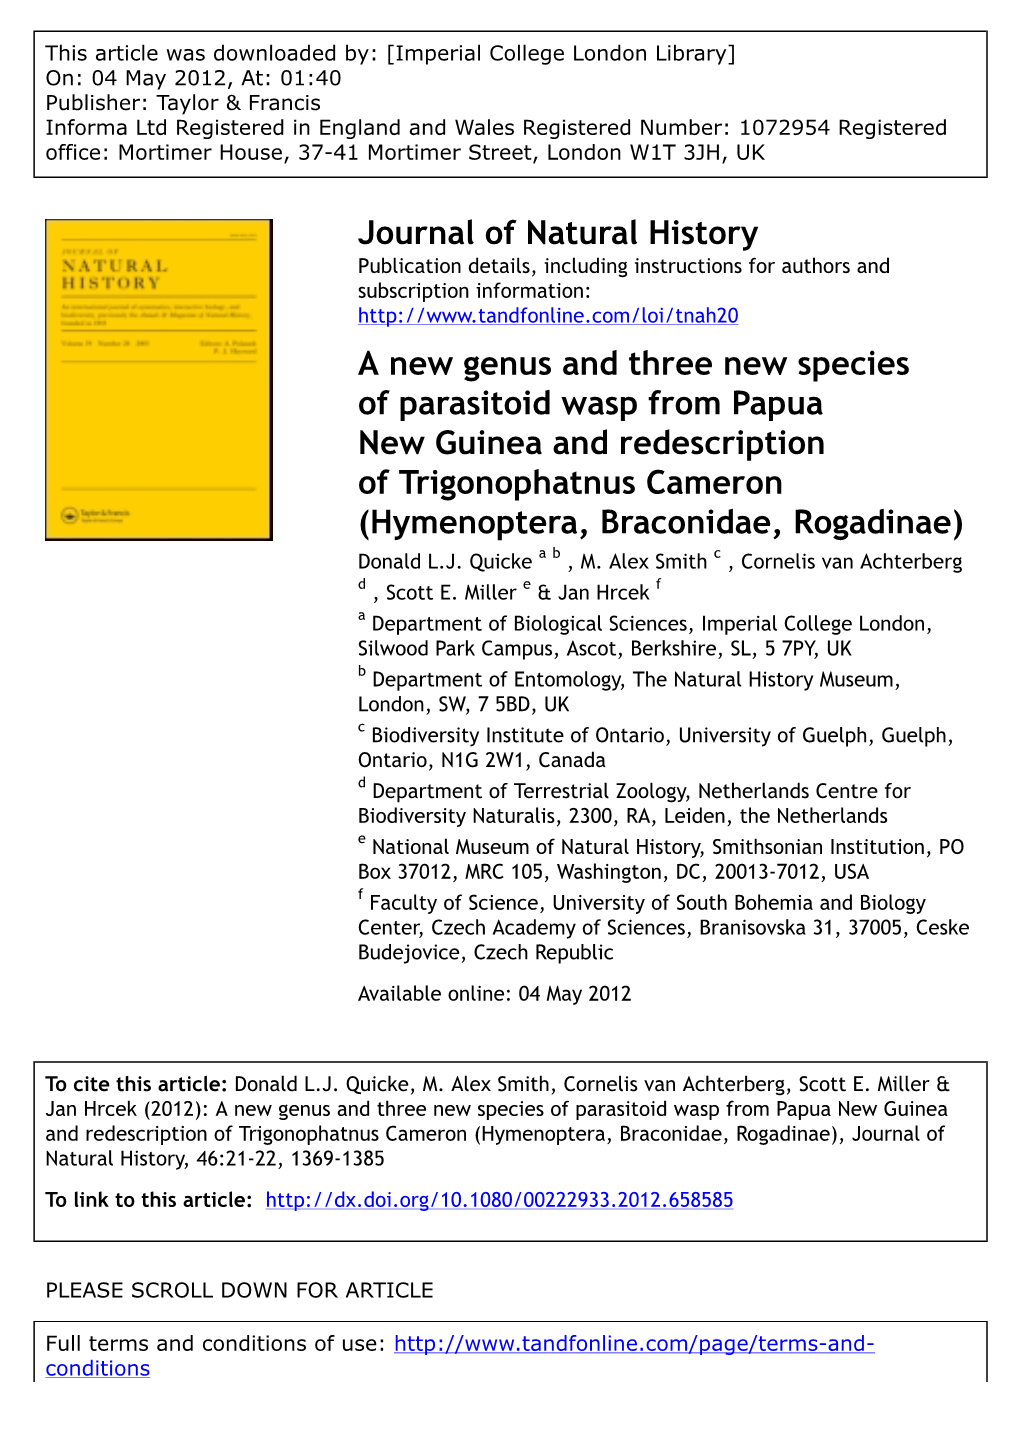 A New Genus and Three New Species of Parasitoid Wasp from Papua New Guinea and Redescription of Trigonophatnus Cameron (Hymenoptera, Braconidae, Rogadinae) Donald L.J